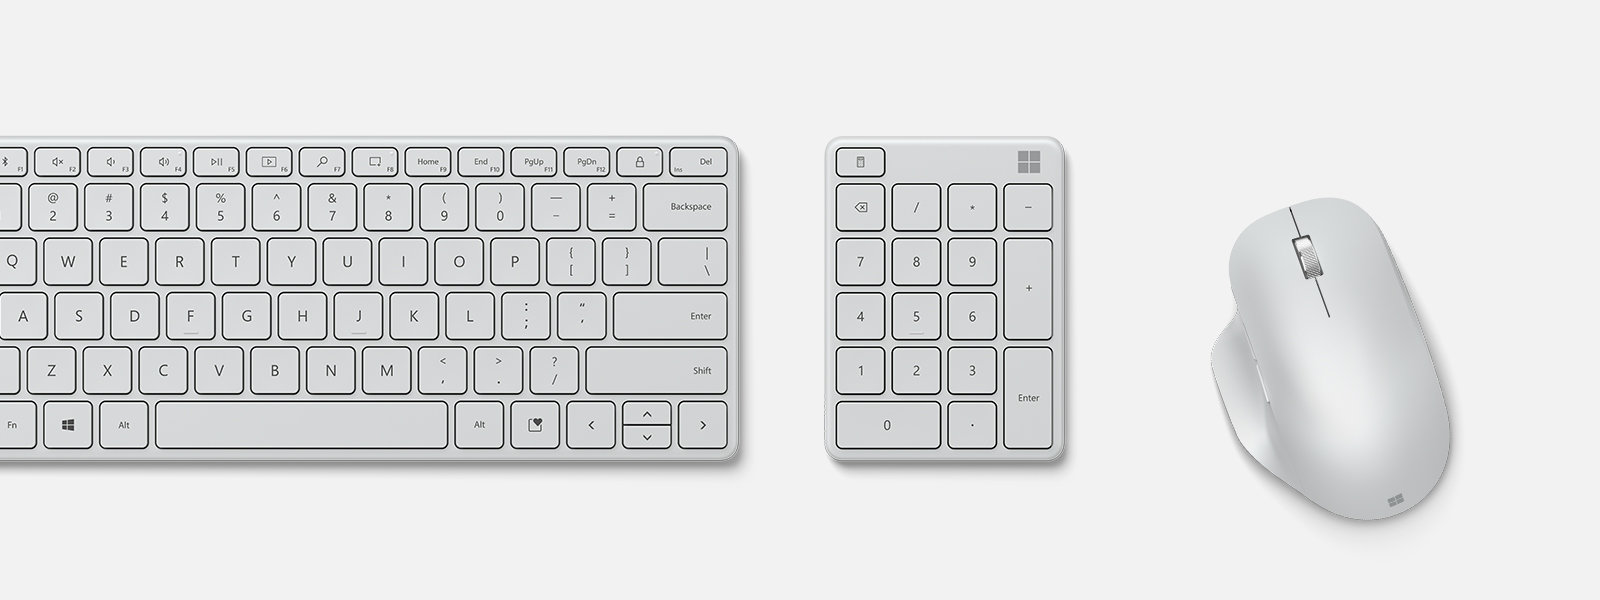 A Monza Grey Microsoft Number Pad between a keyboard and mouse.